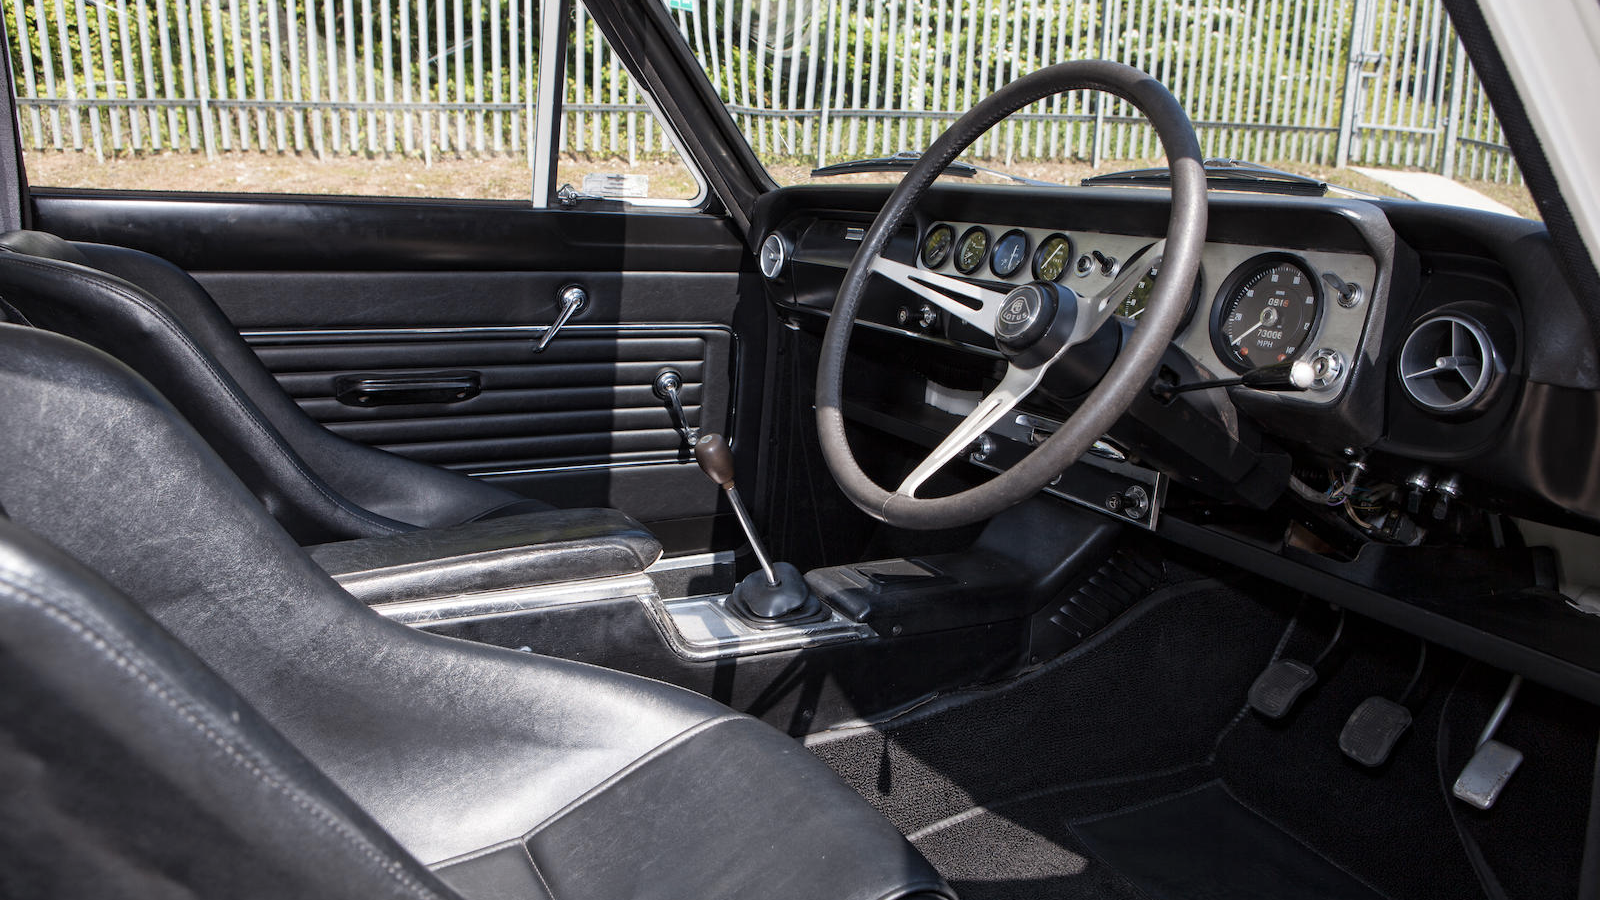 Lotus Cortinas driven by Jacky Ickx and Jim Clark to sell at auction